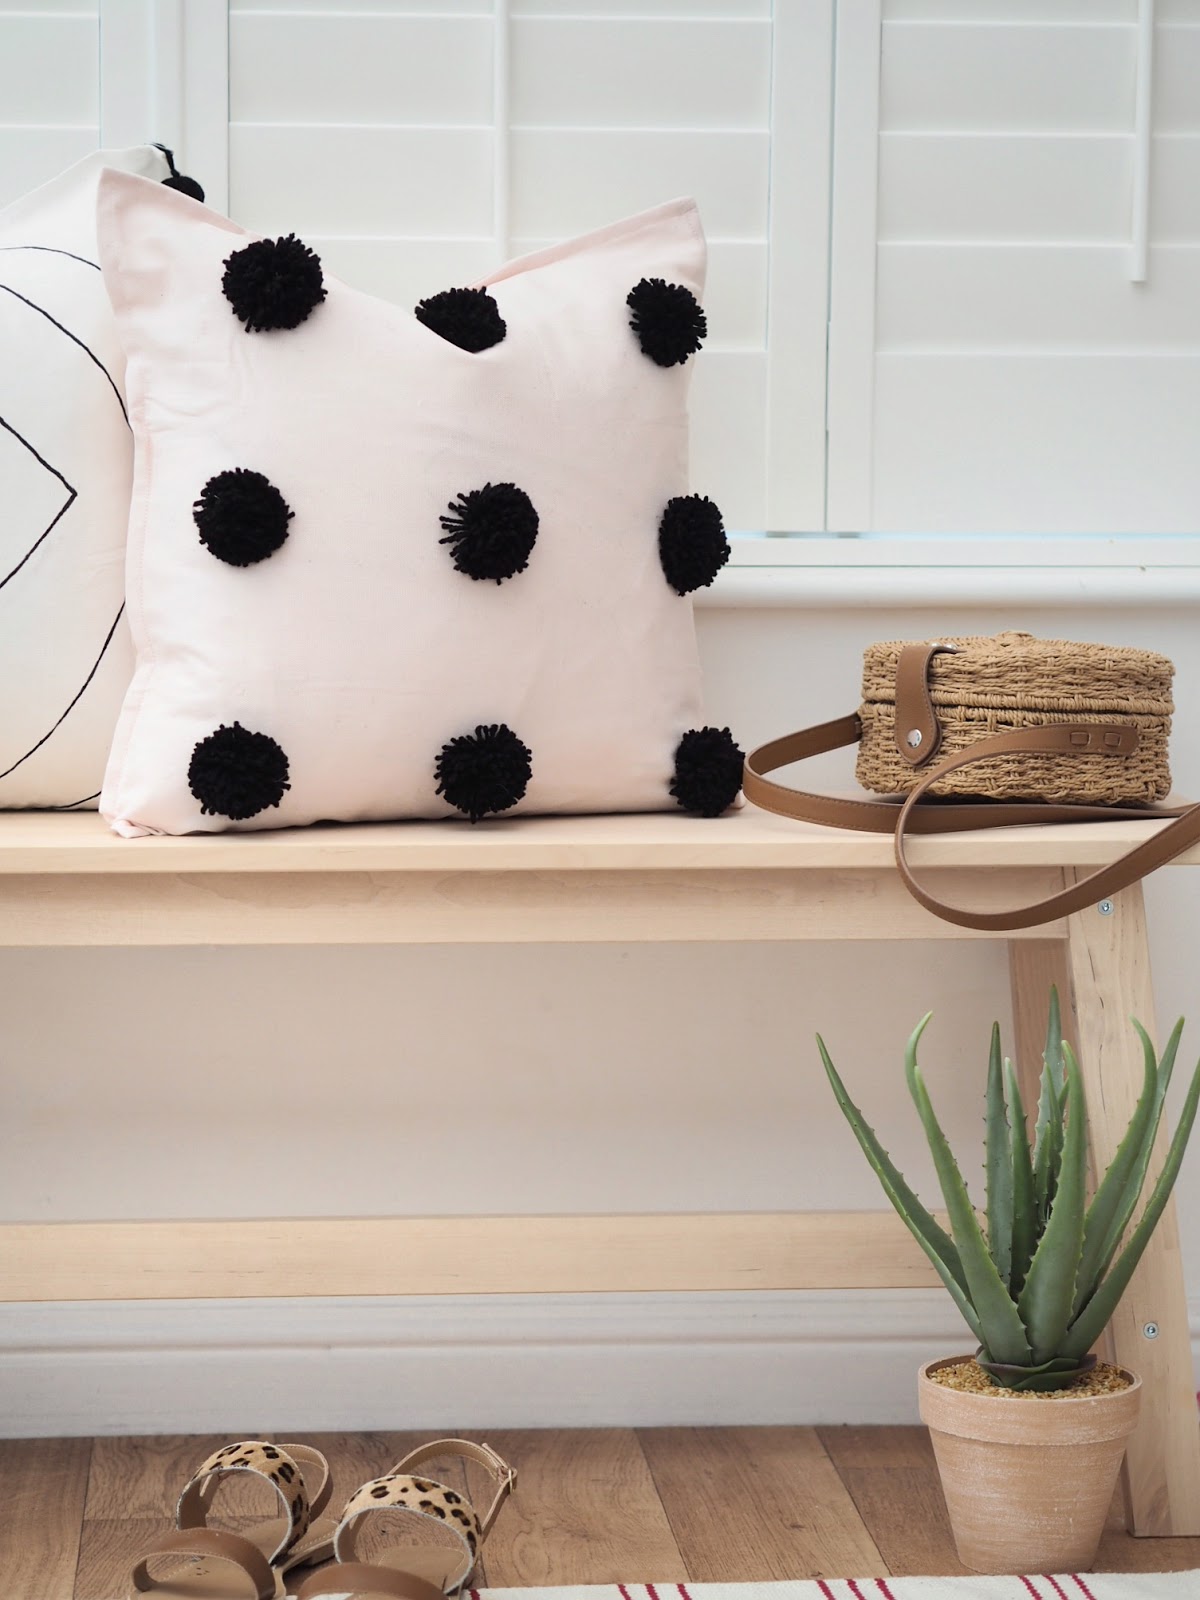 DIY tutorial boho cushion cover with woollen pom poms and tassels. Hand drawn and finished with fabric paint. DIY handmade home interiors to create luxury decor on a budget